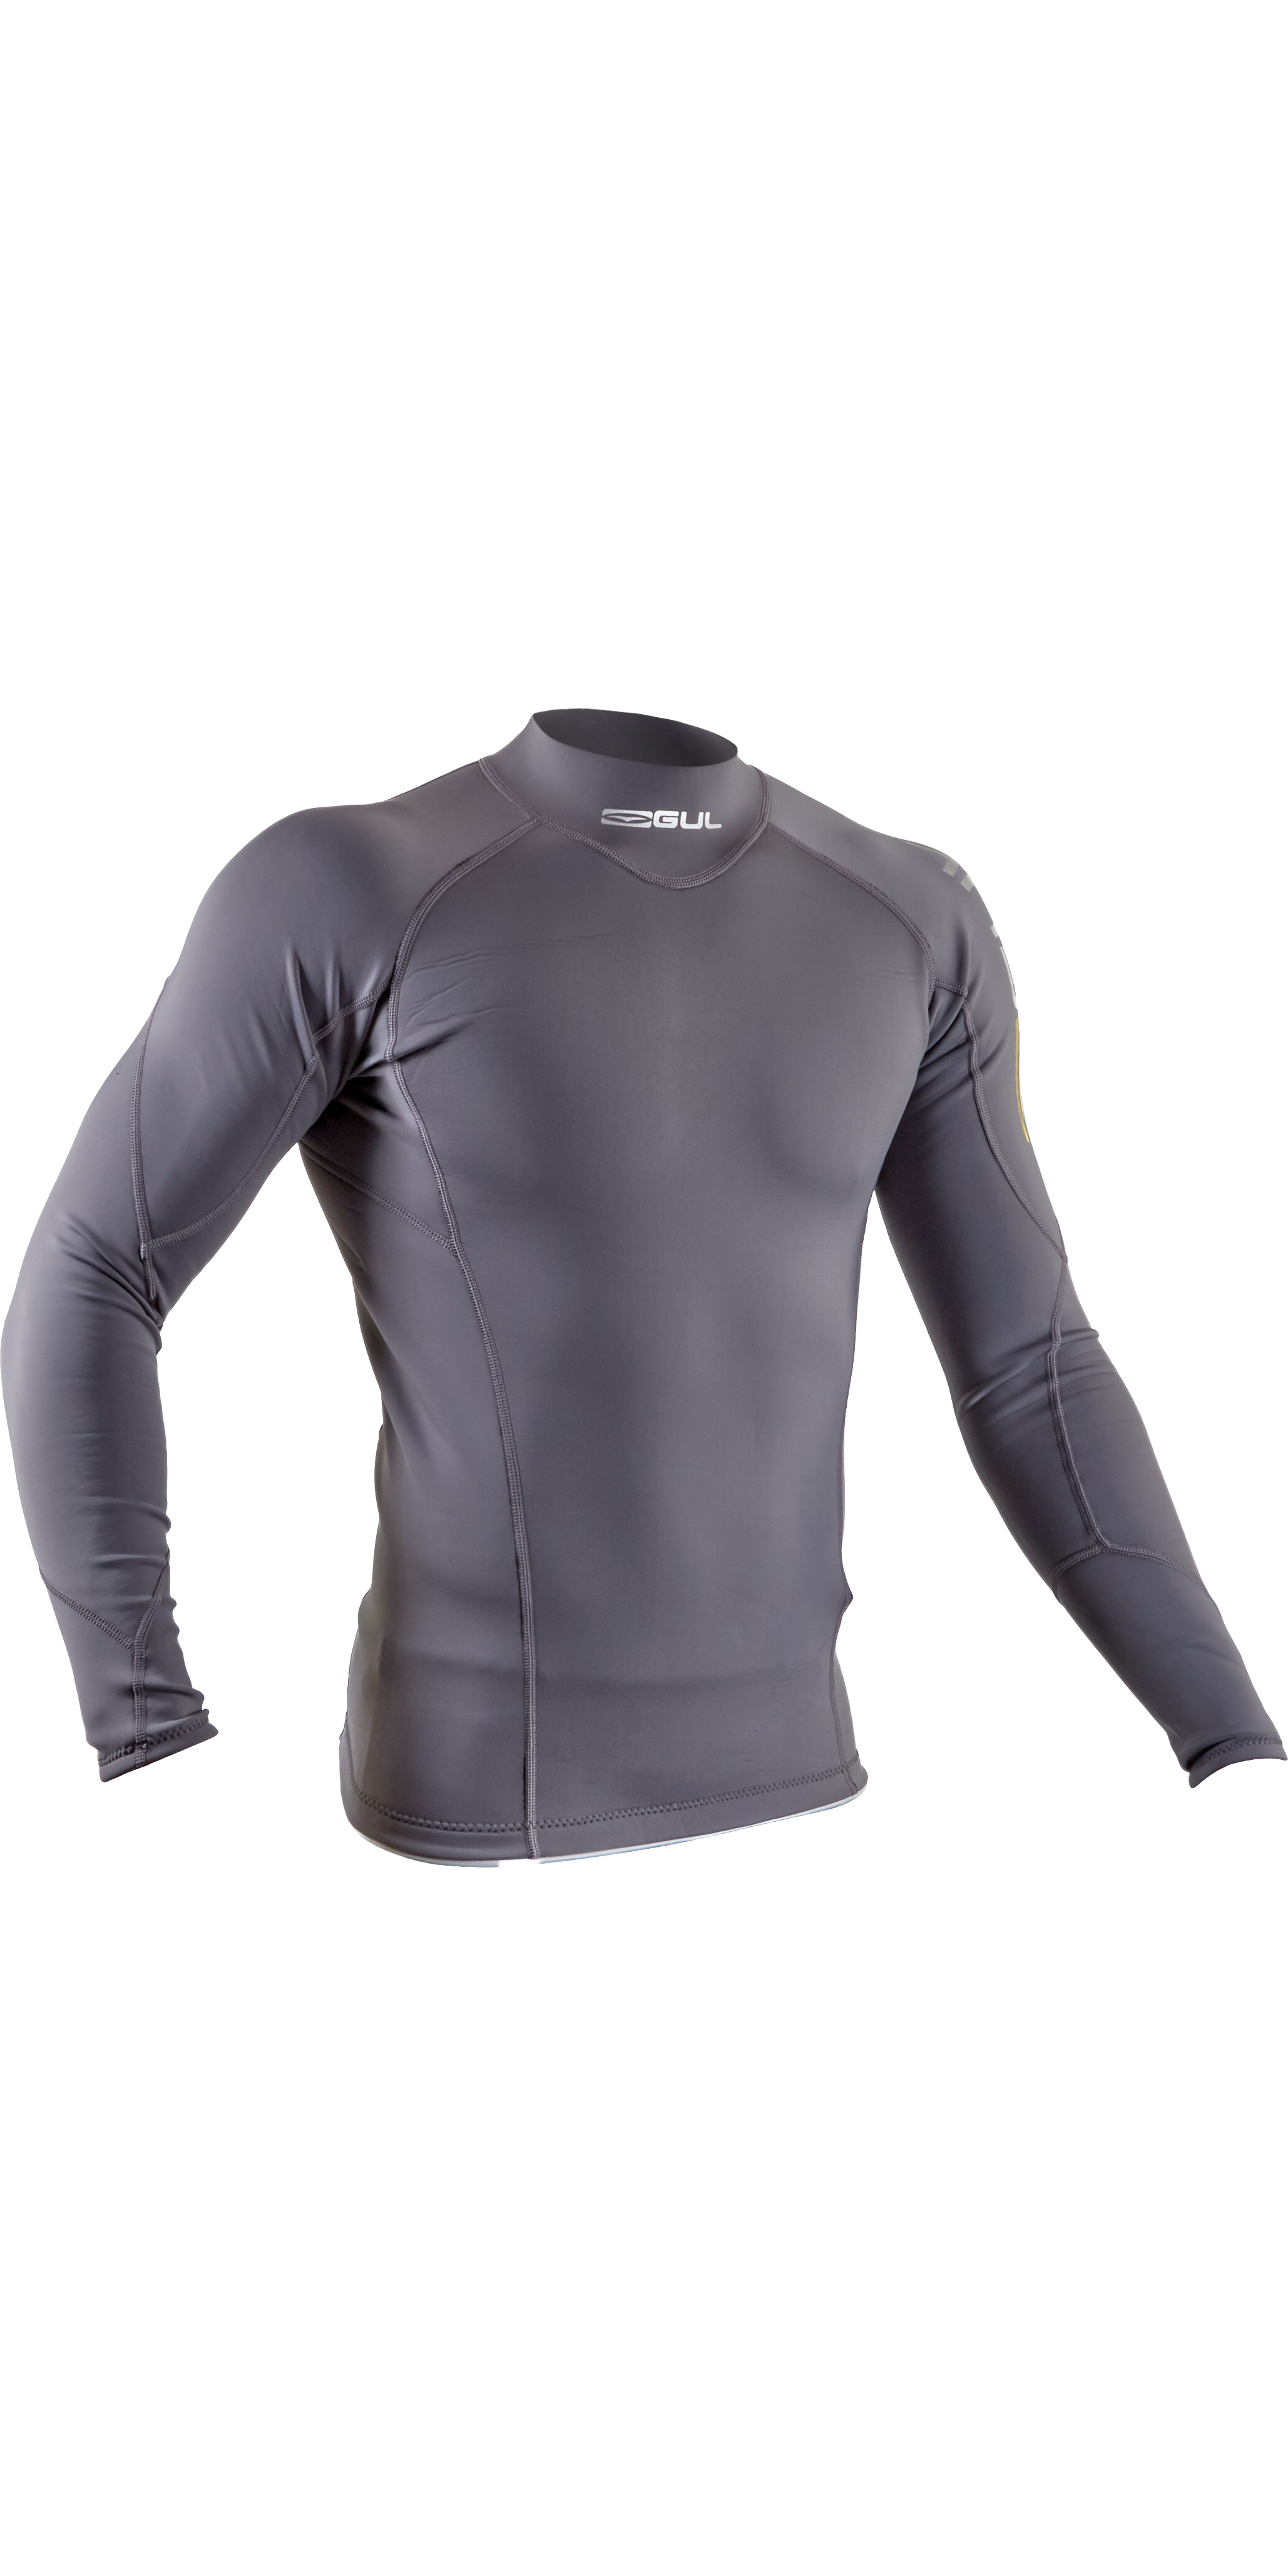 GUL CODE ZERO 1mm THERMO WETSUIT TOP BNWT AC0115 WATERSPORTS SAILING JXL 15 16 